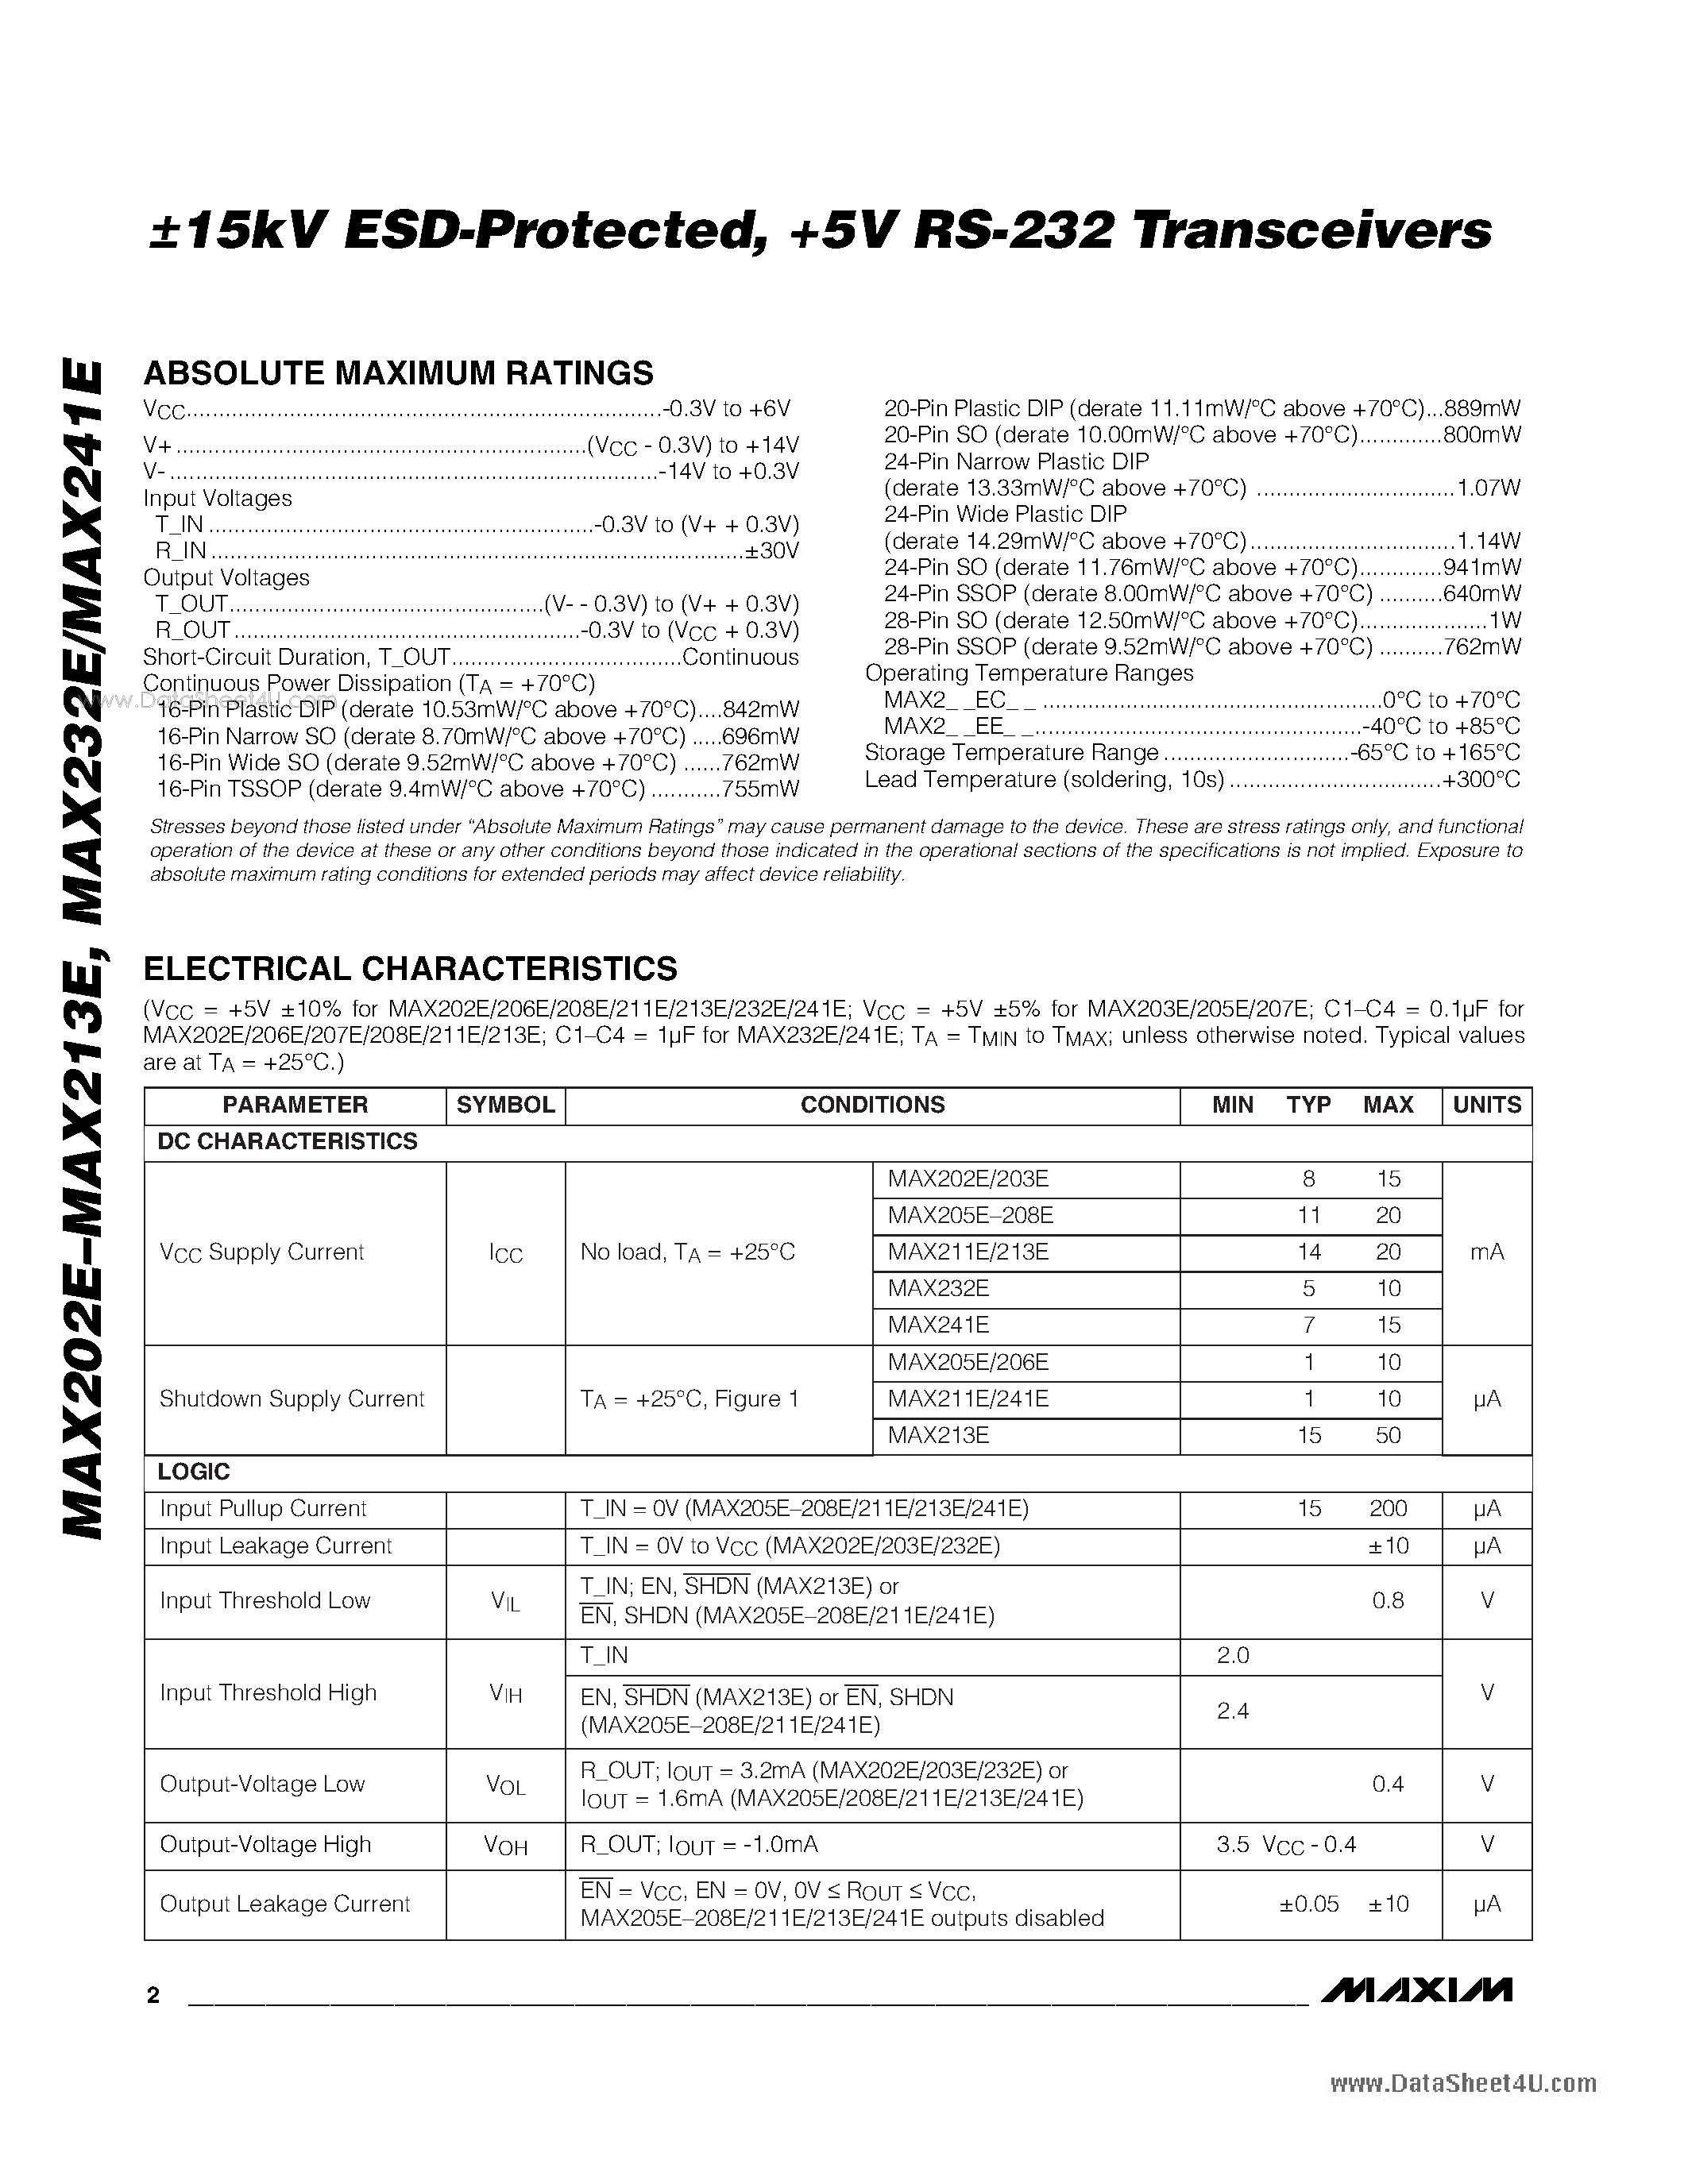 Datasheet MAX202E - +5V RS-232 Transceivers page 2